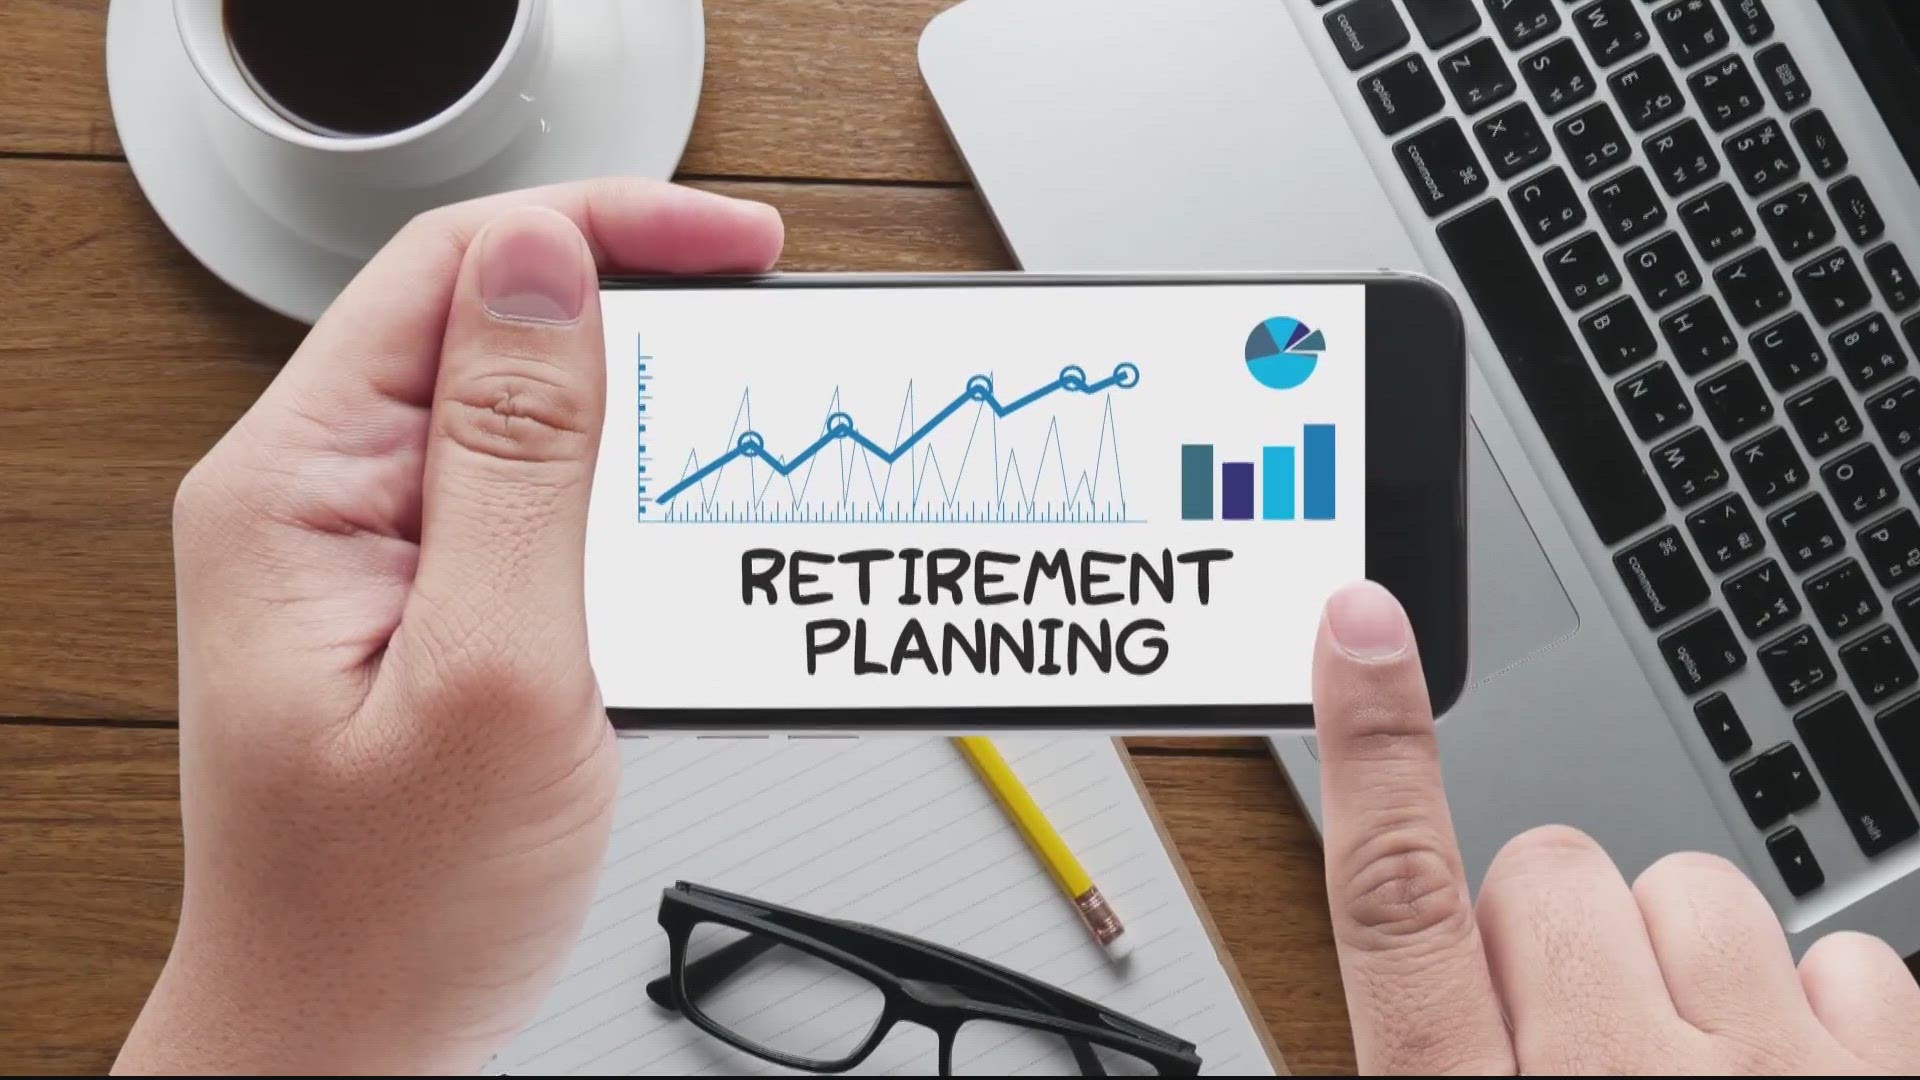 A survey by the American Advisors Group found that more than a third of Americans feel unprepared or unsure if they are on track for retirement.